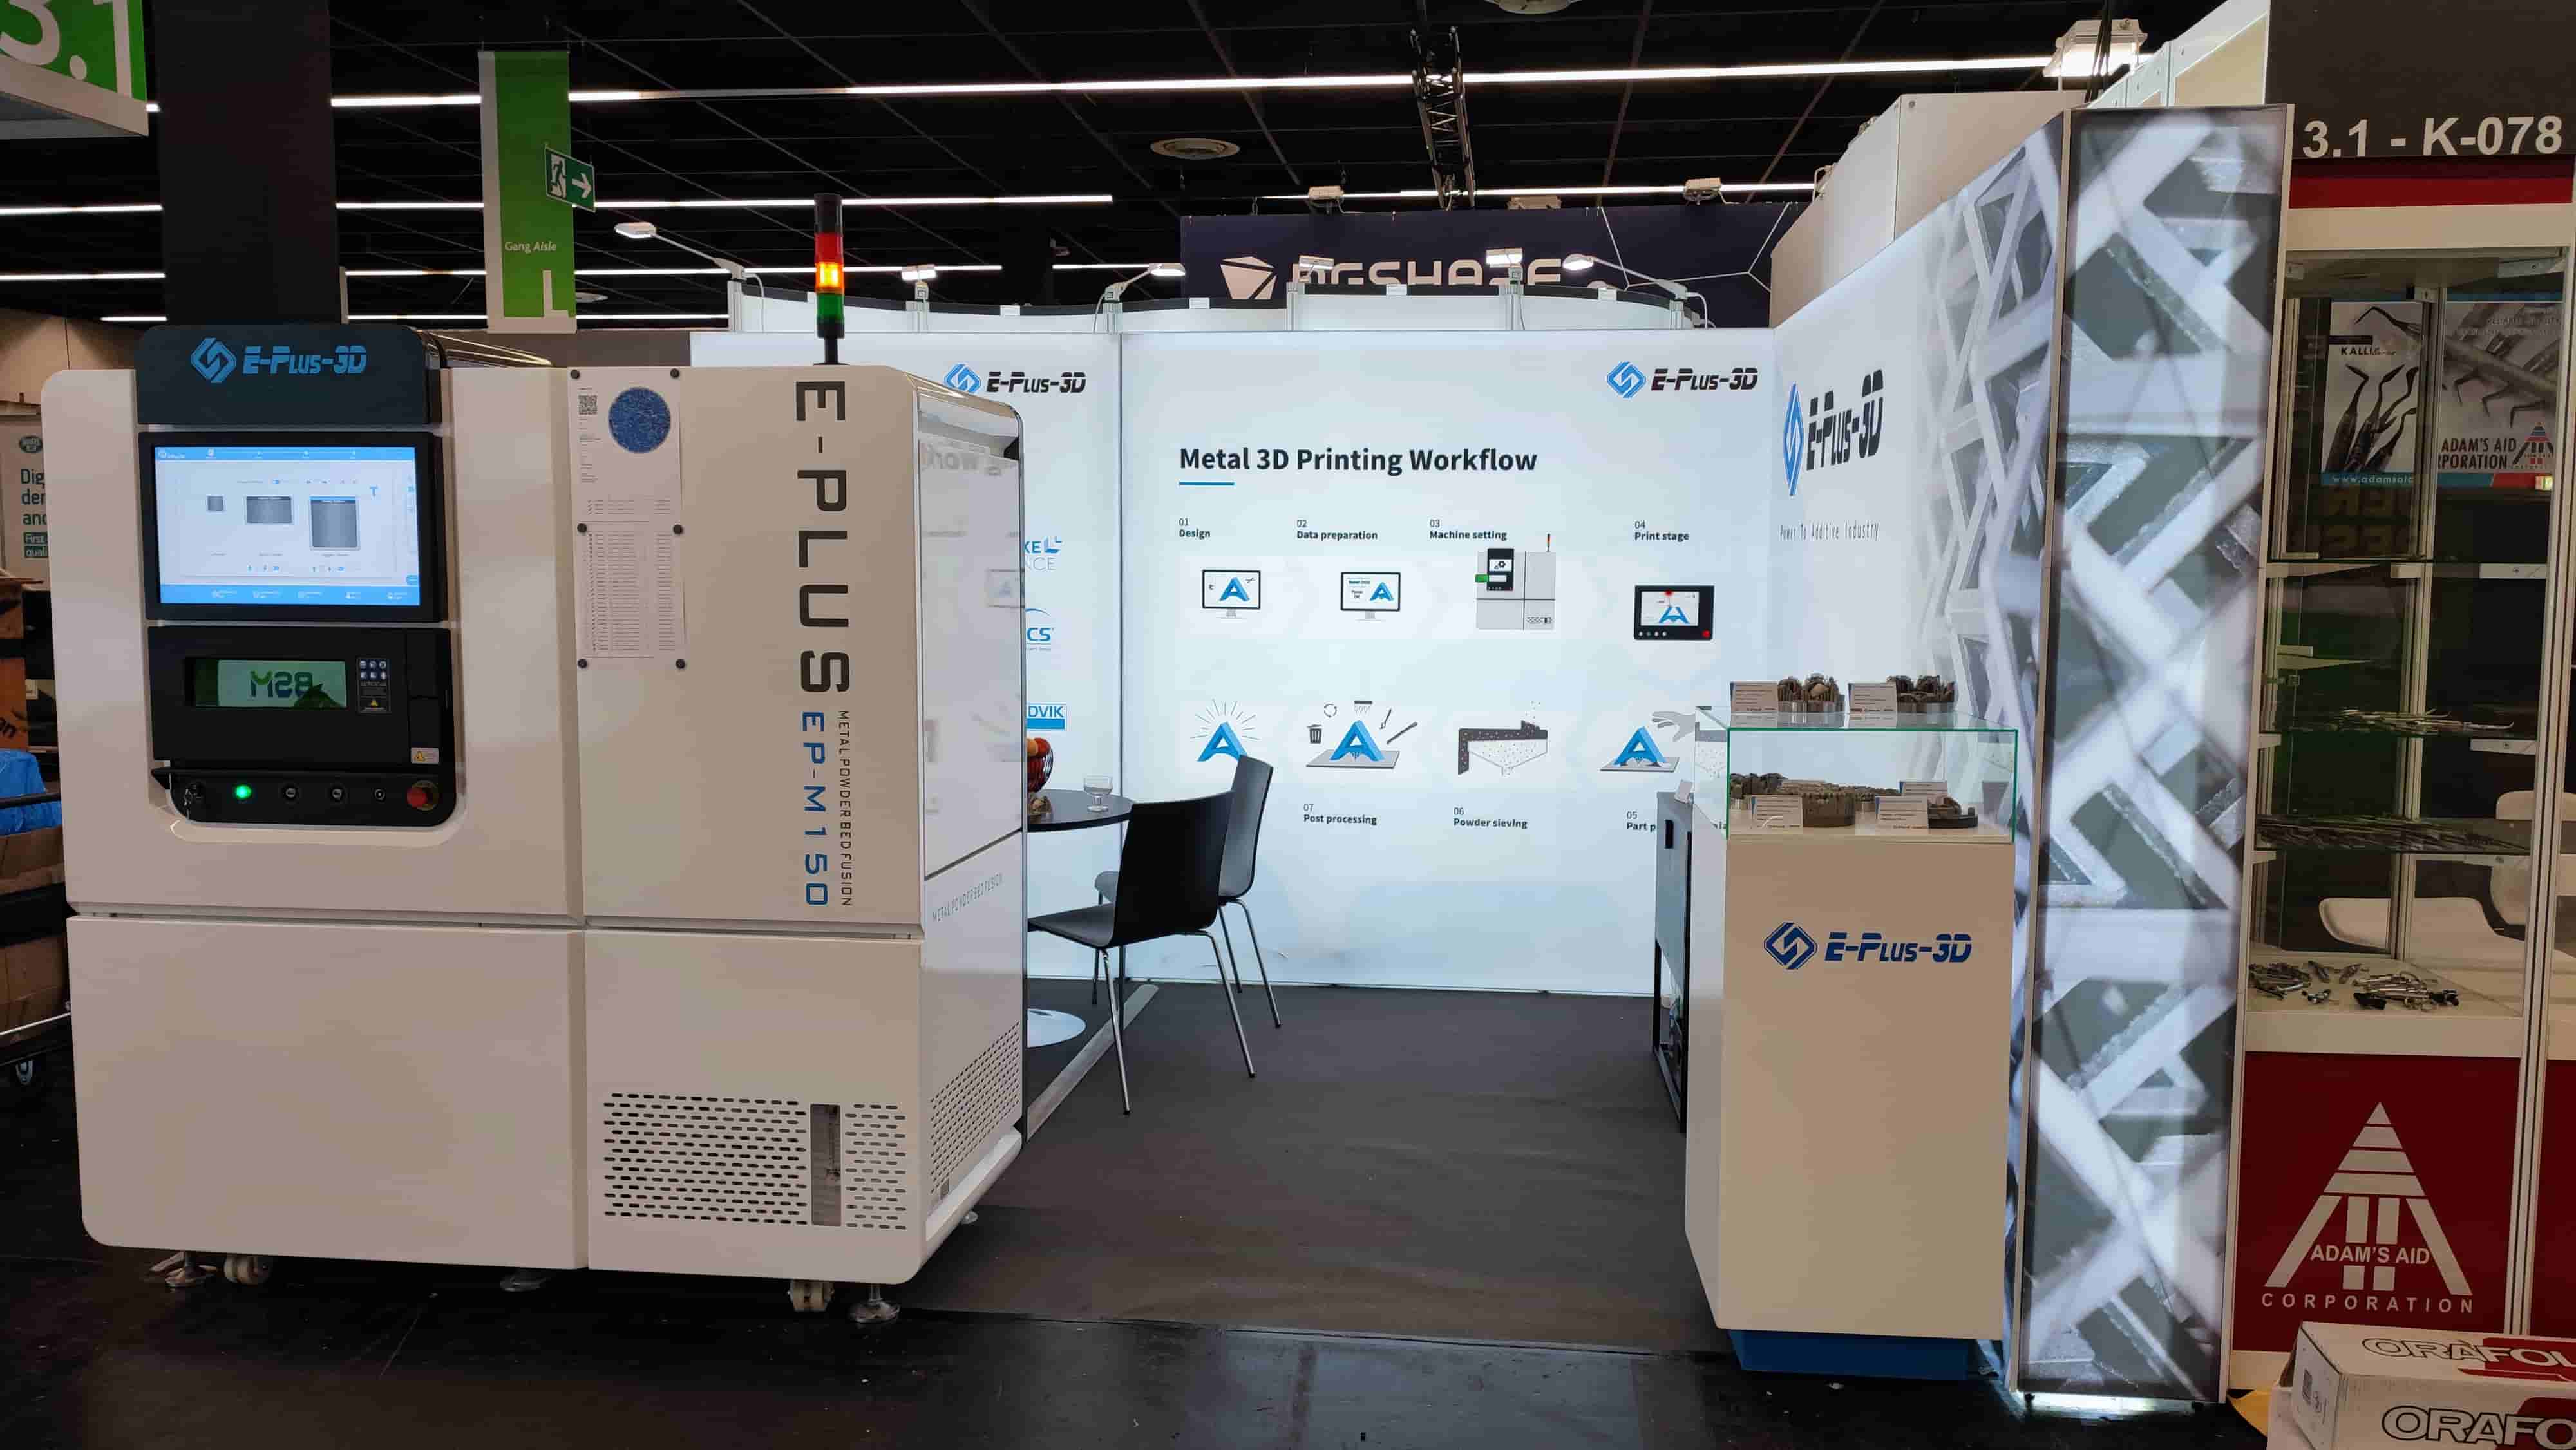 Eplus3D-booth-in-IDS-exhibition.jpg